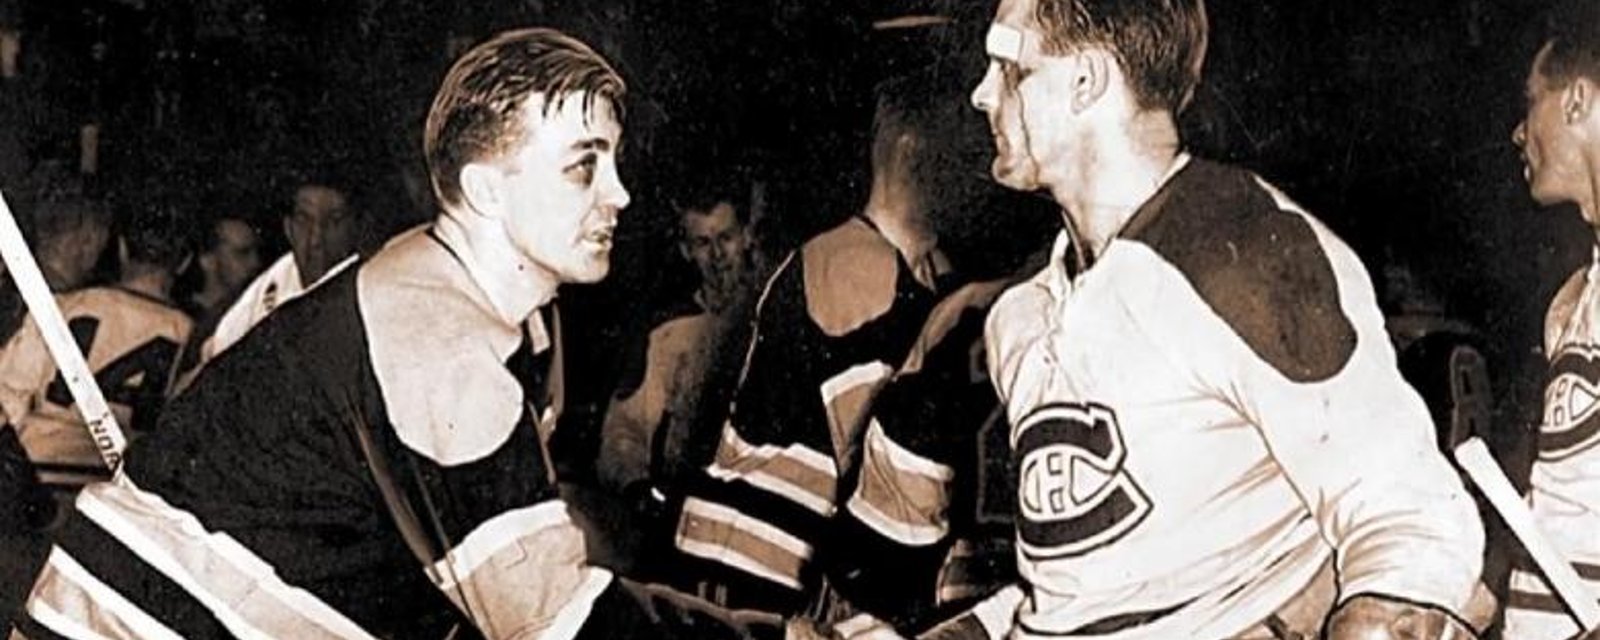 A look back at the NHL's most epic rivalry.